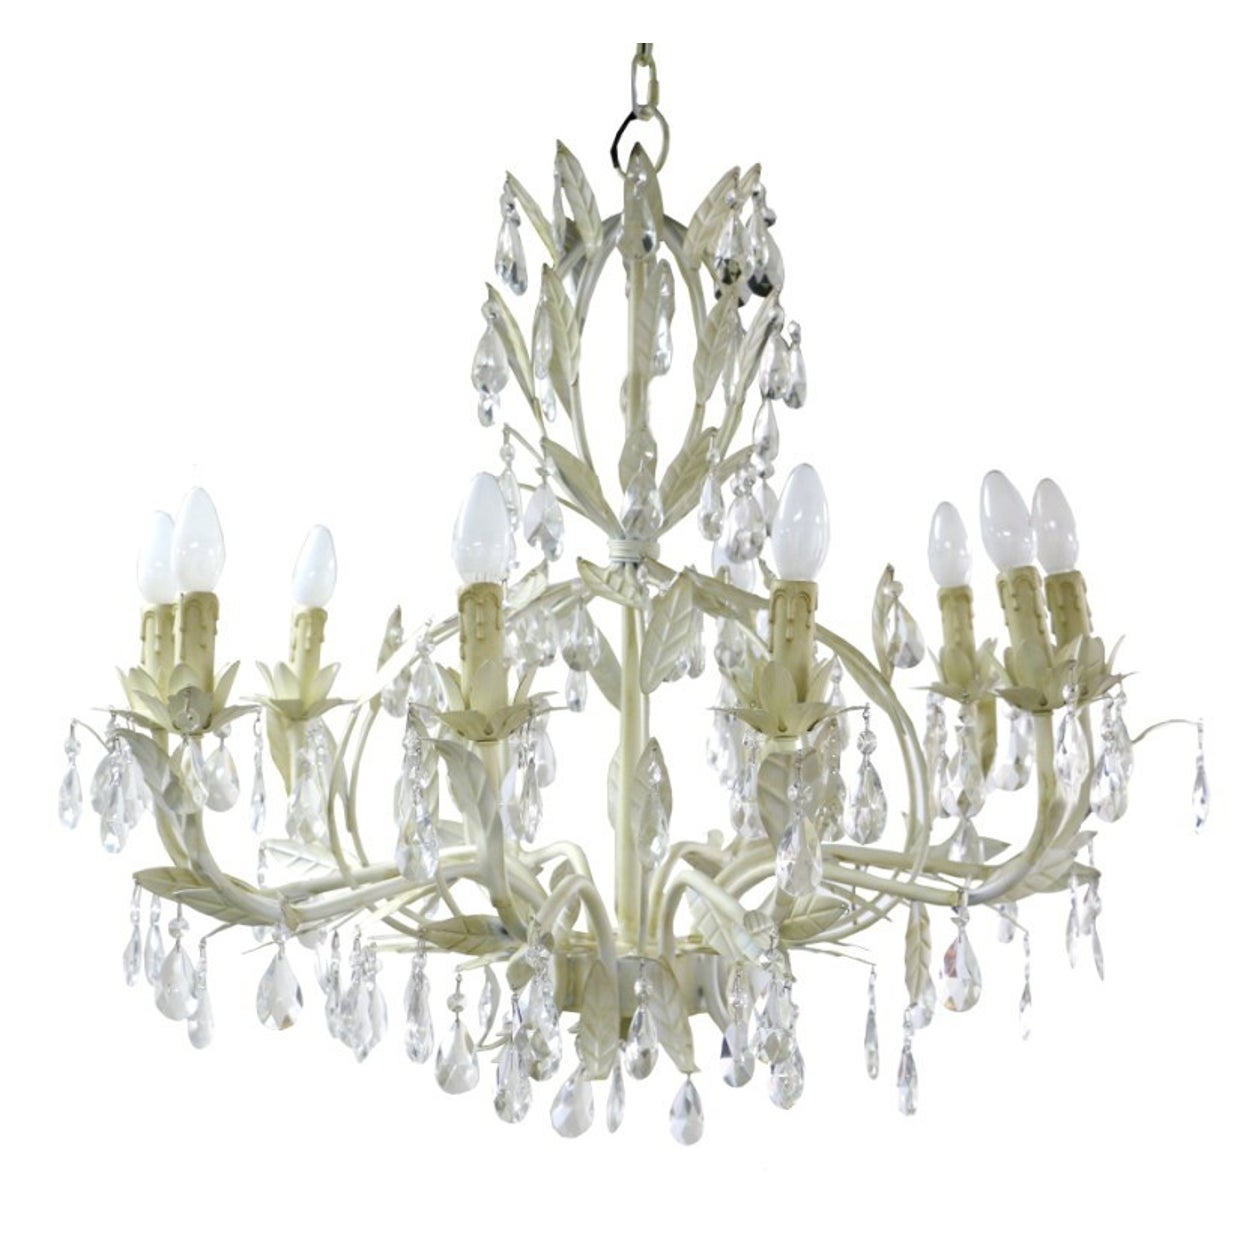 LARGE FLEURENCE CHANDELIER - ANTIQUE WHITE WITH GLASS CRYSTALS - 10 LIGHT